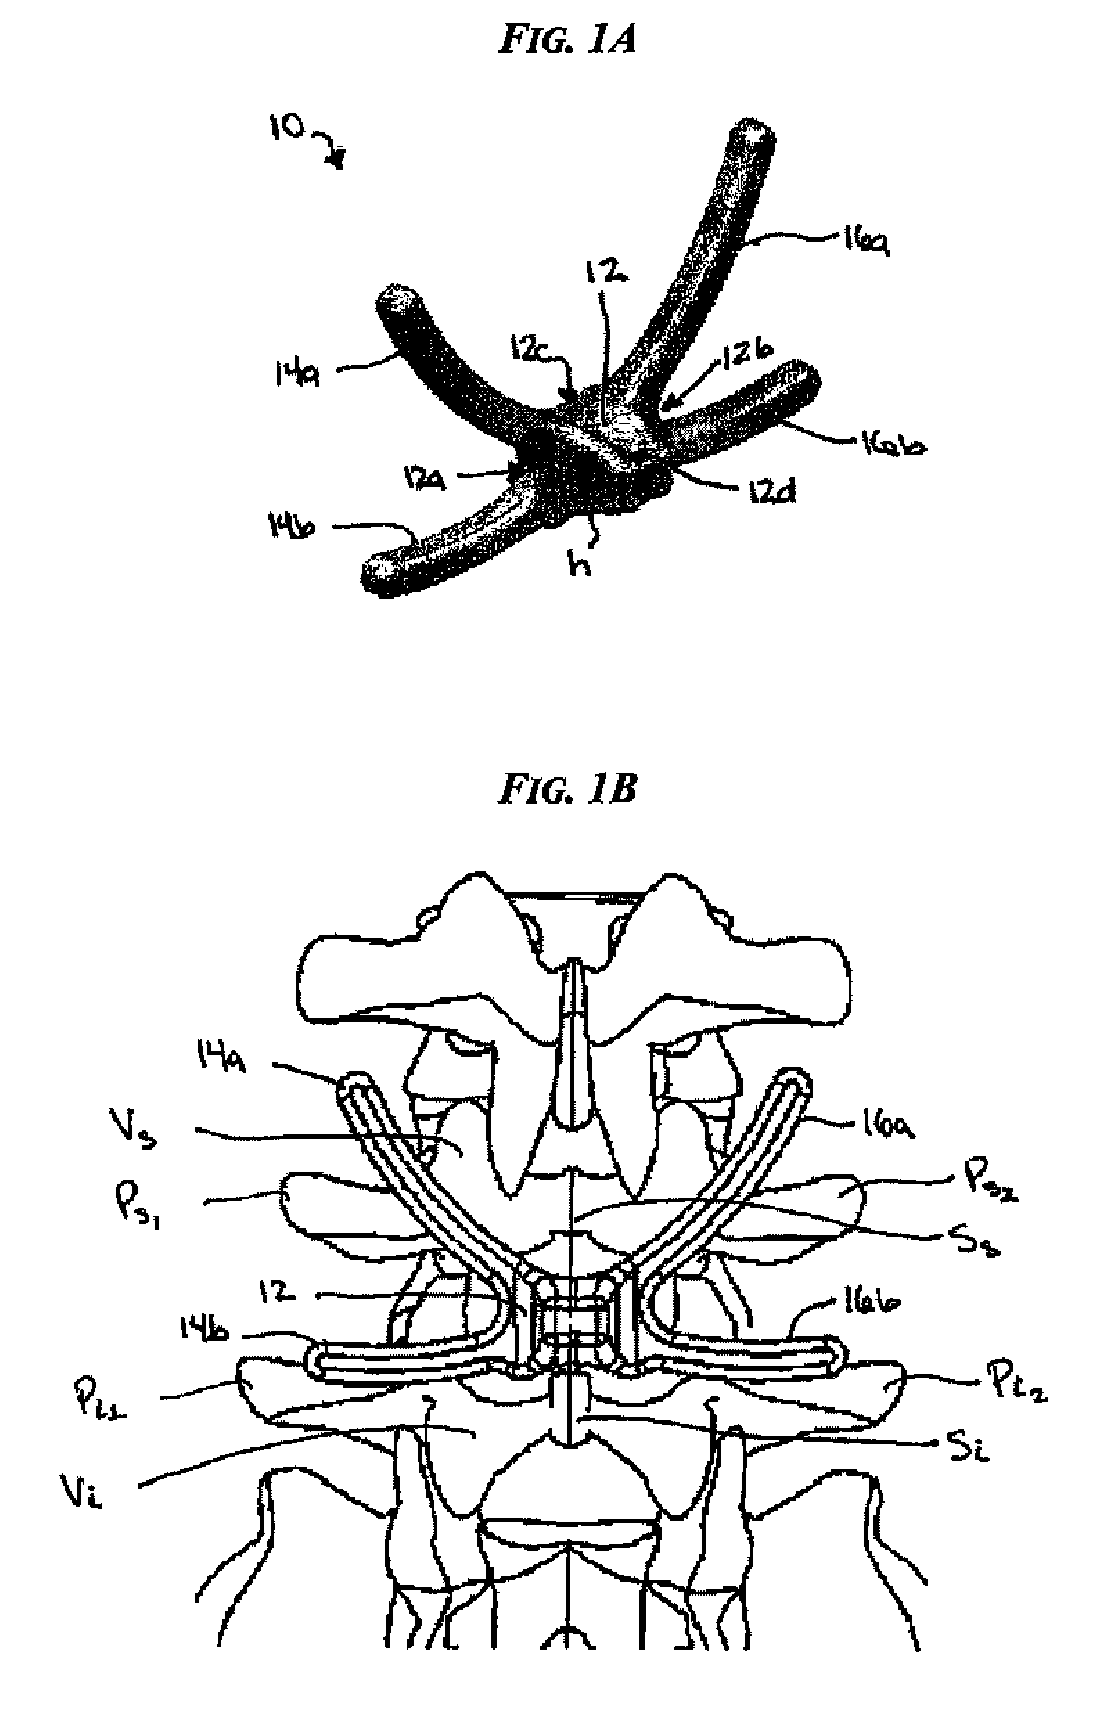 Multi-level posterior dynamic stabilization systems and methods